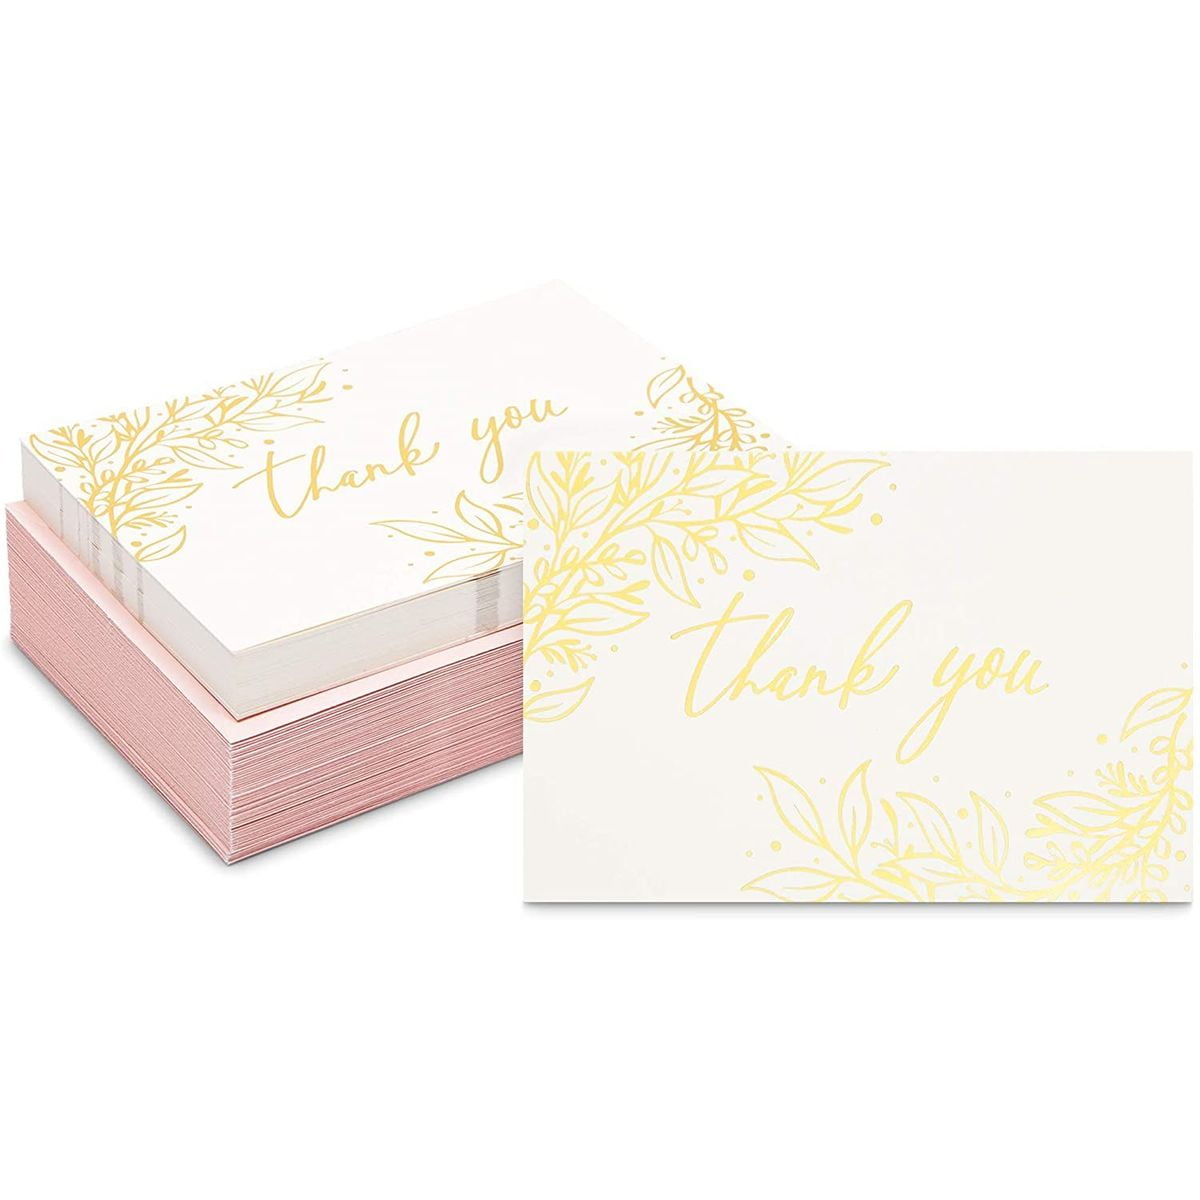 60 ct 6x4 inch Gold Floral Thank You Cards with Pink Envelopes